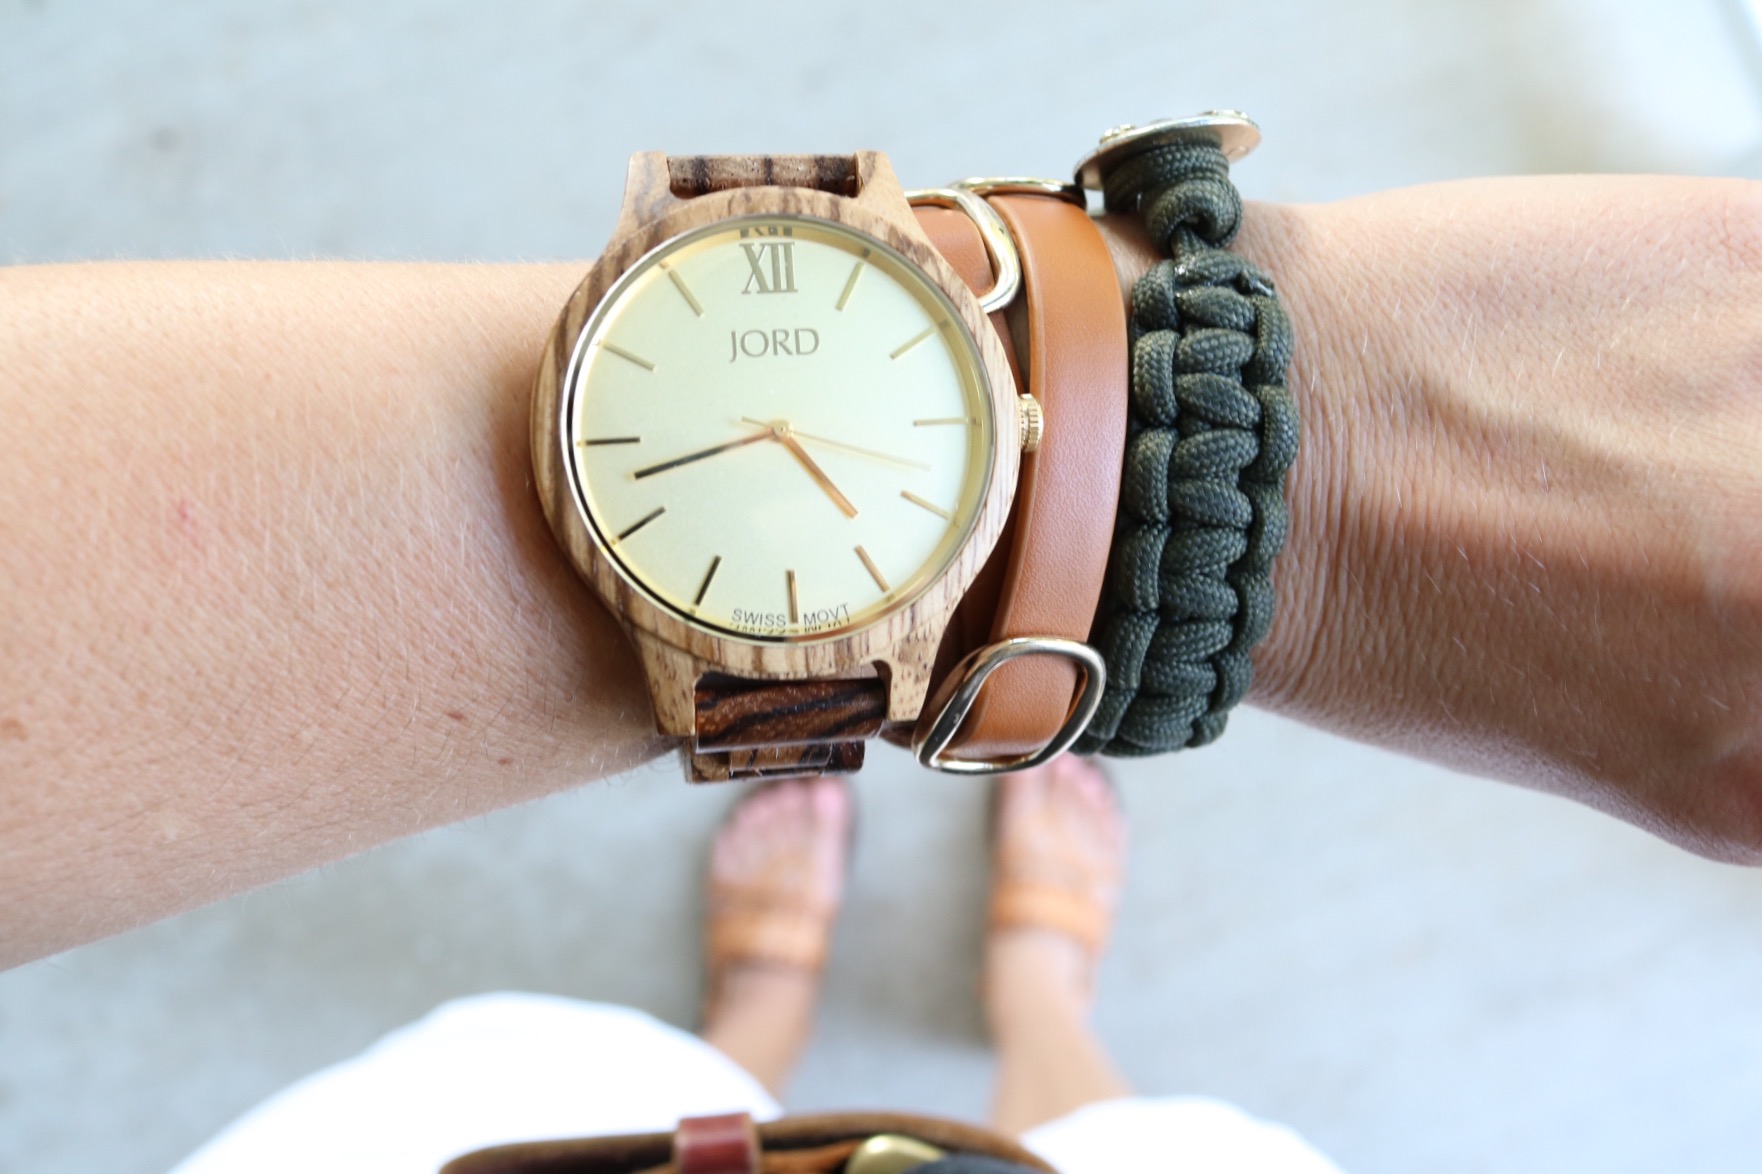 Fun FRIYAY Finds - JORD Wood Watches - The perfect watch for a busy mom!